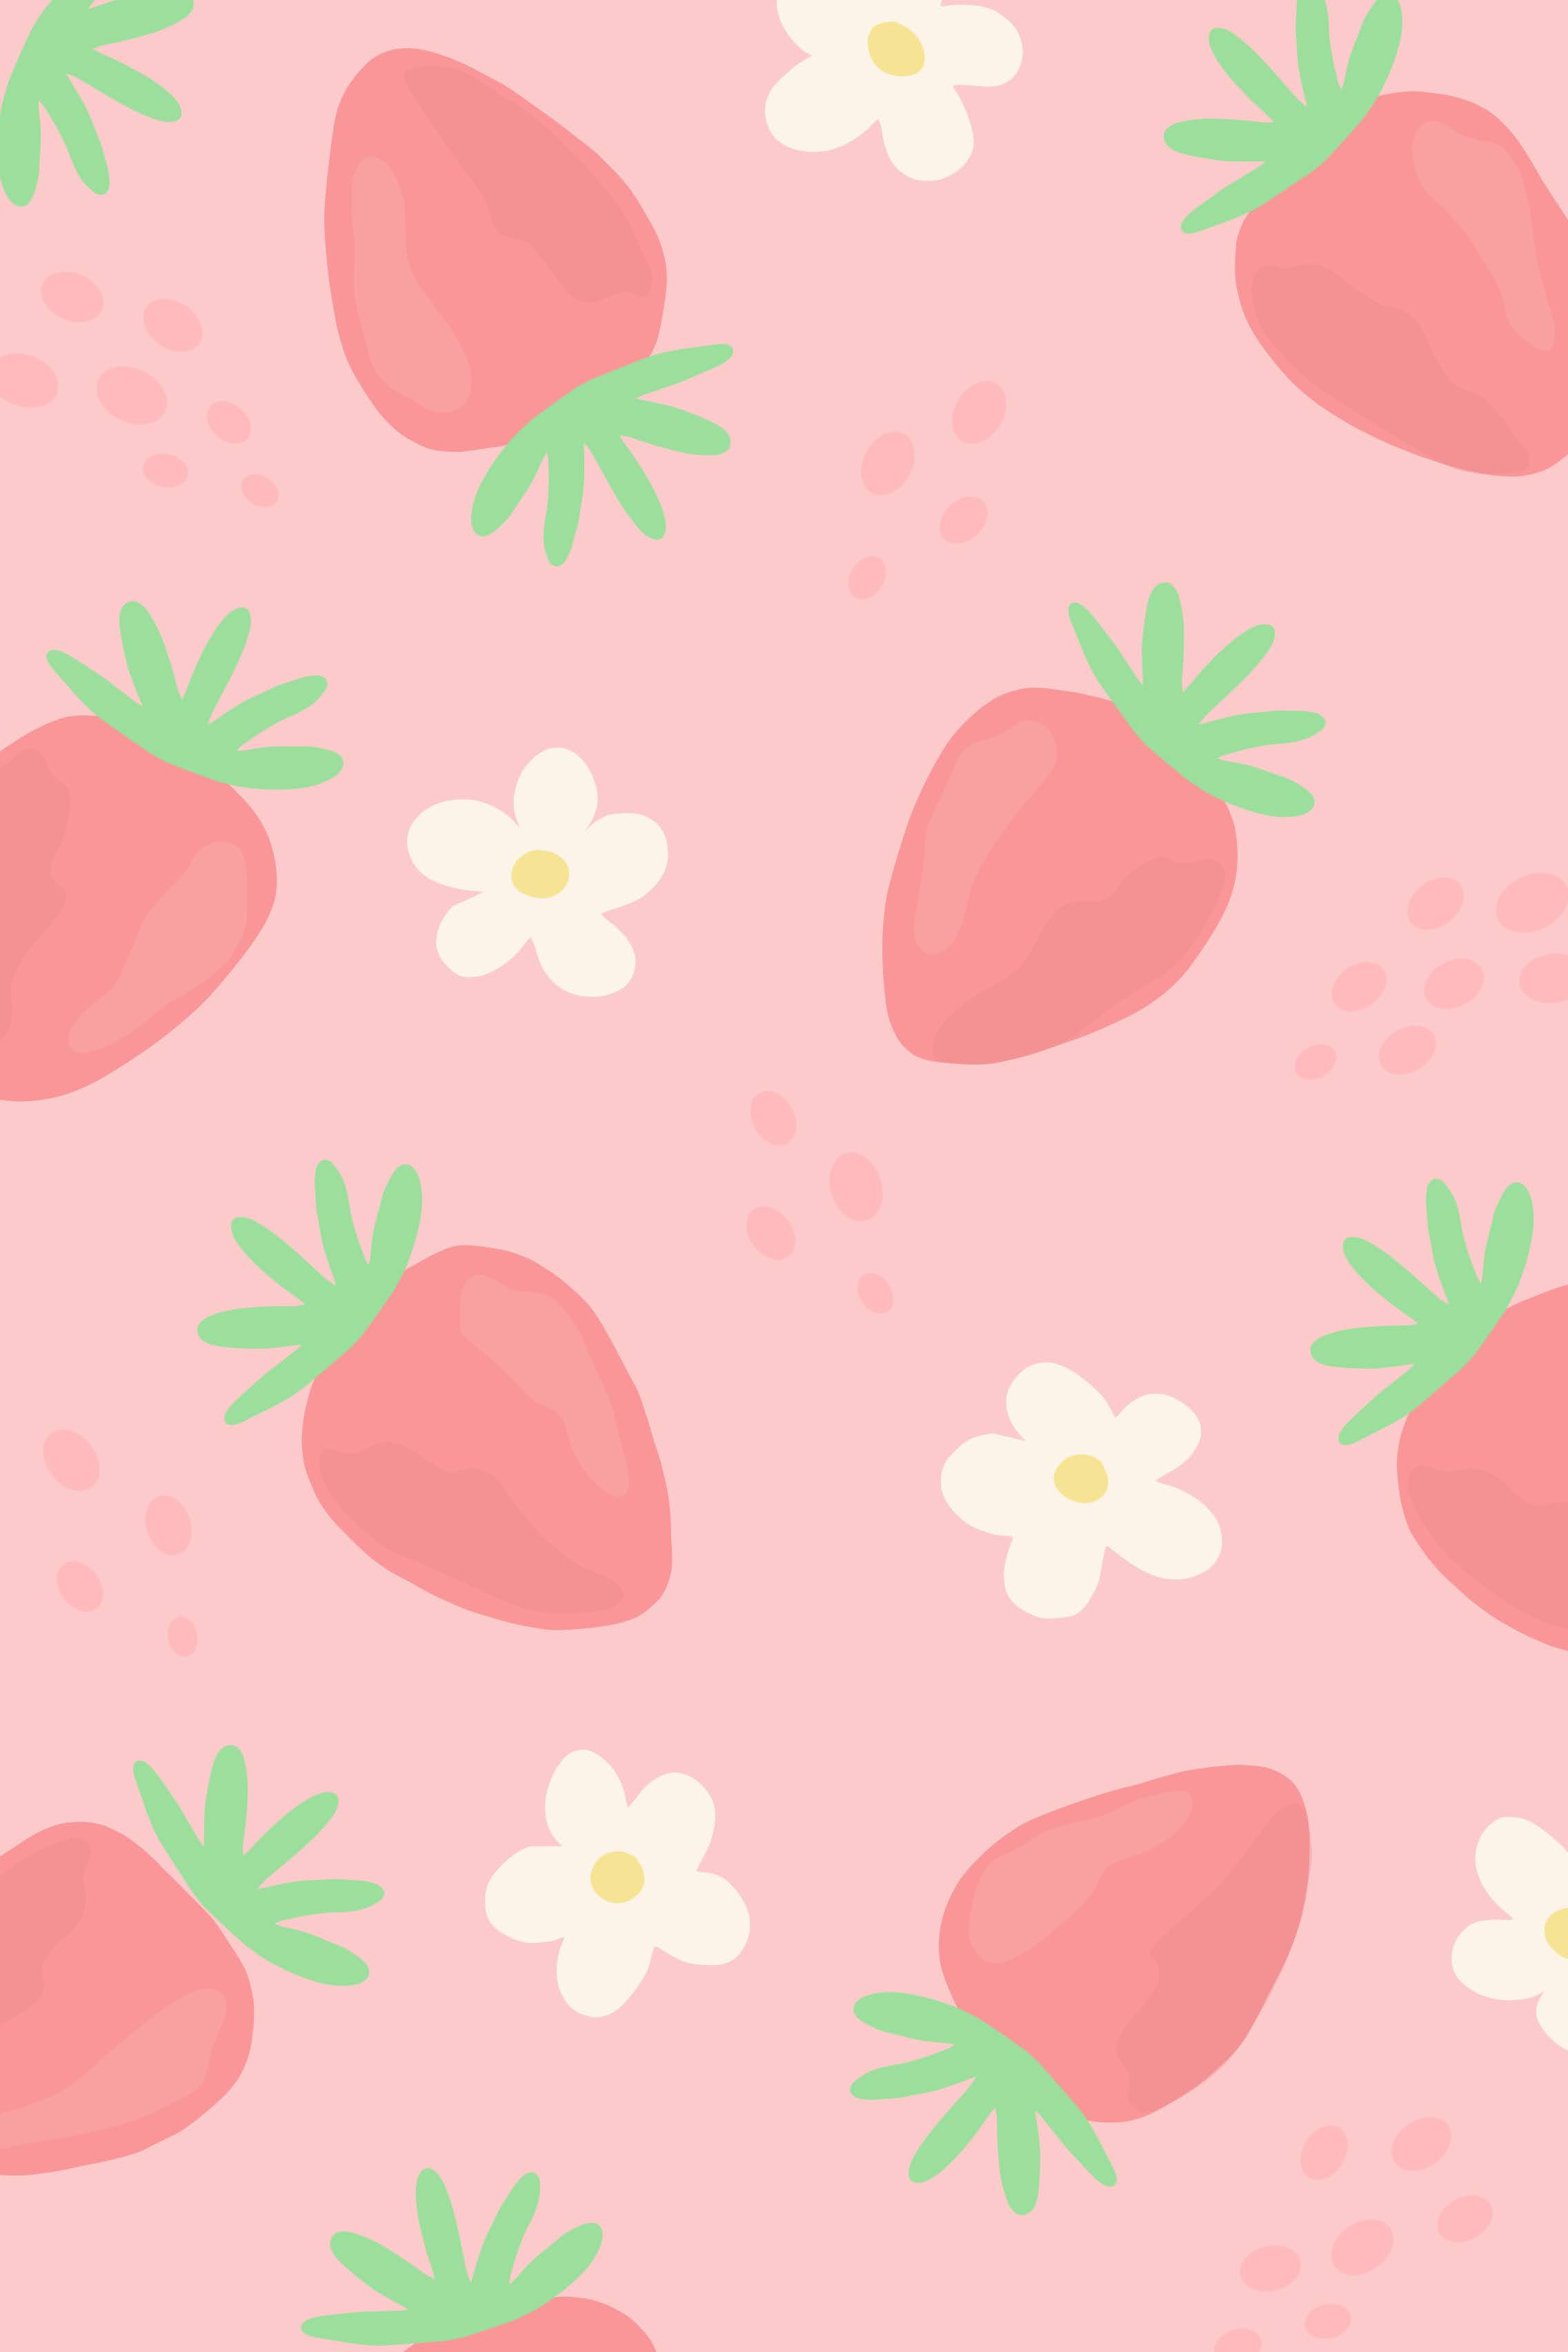 Download Pink And Blue Pastel Cute Strawberry Wallpaper  Wallpaperscom